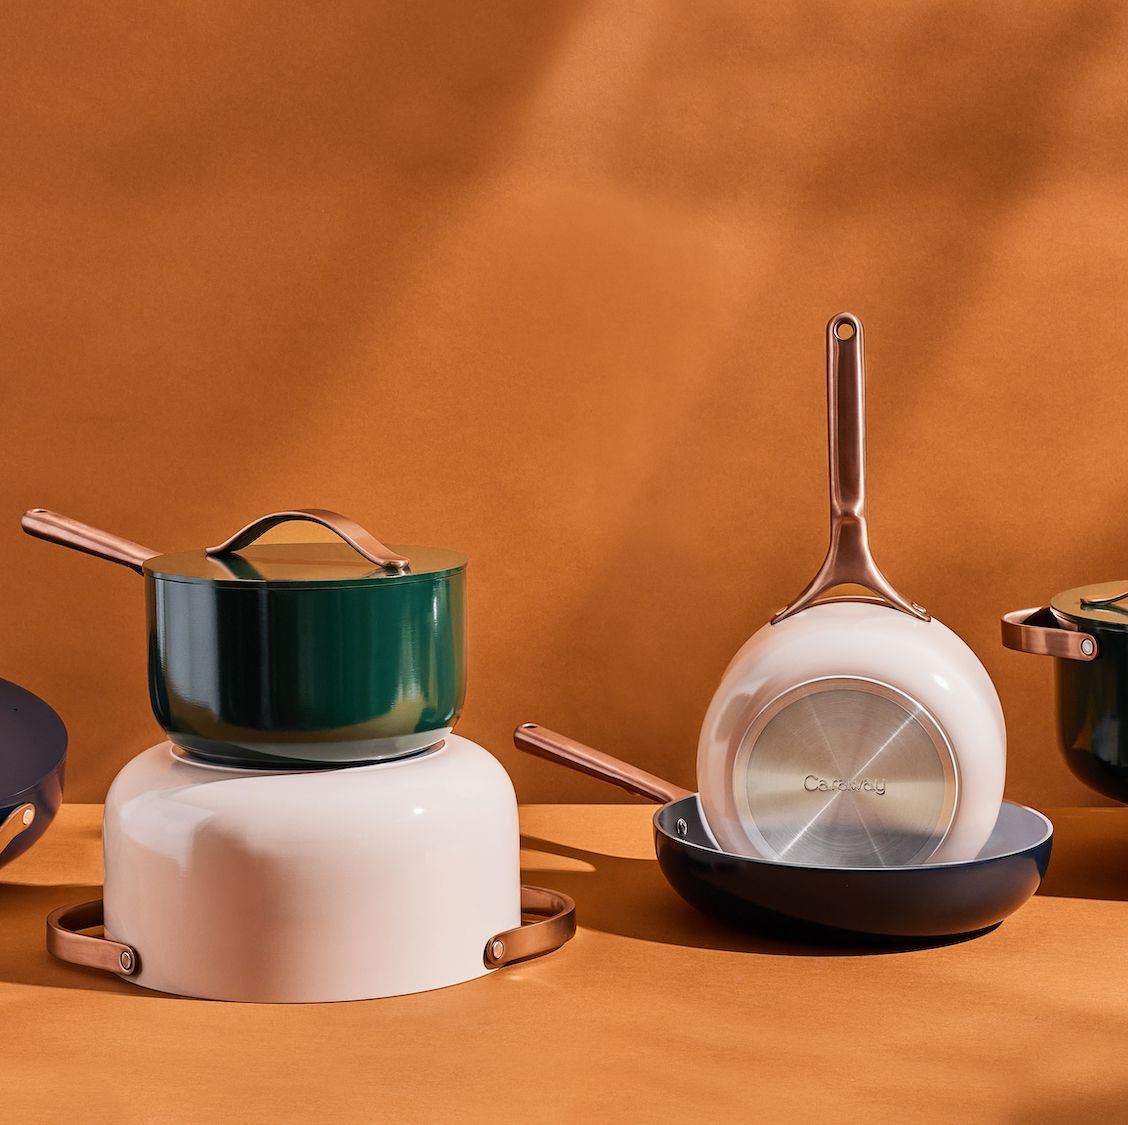 Hurry! Caraway's New Copper Collection Is on Sale for $250 Off